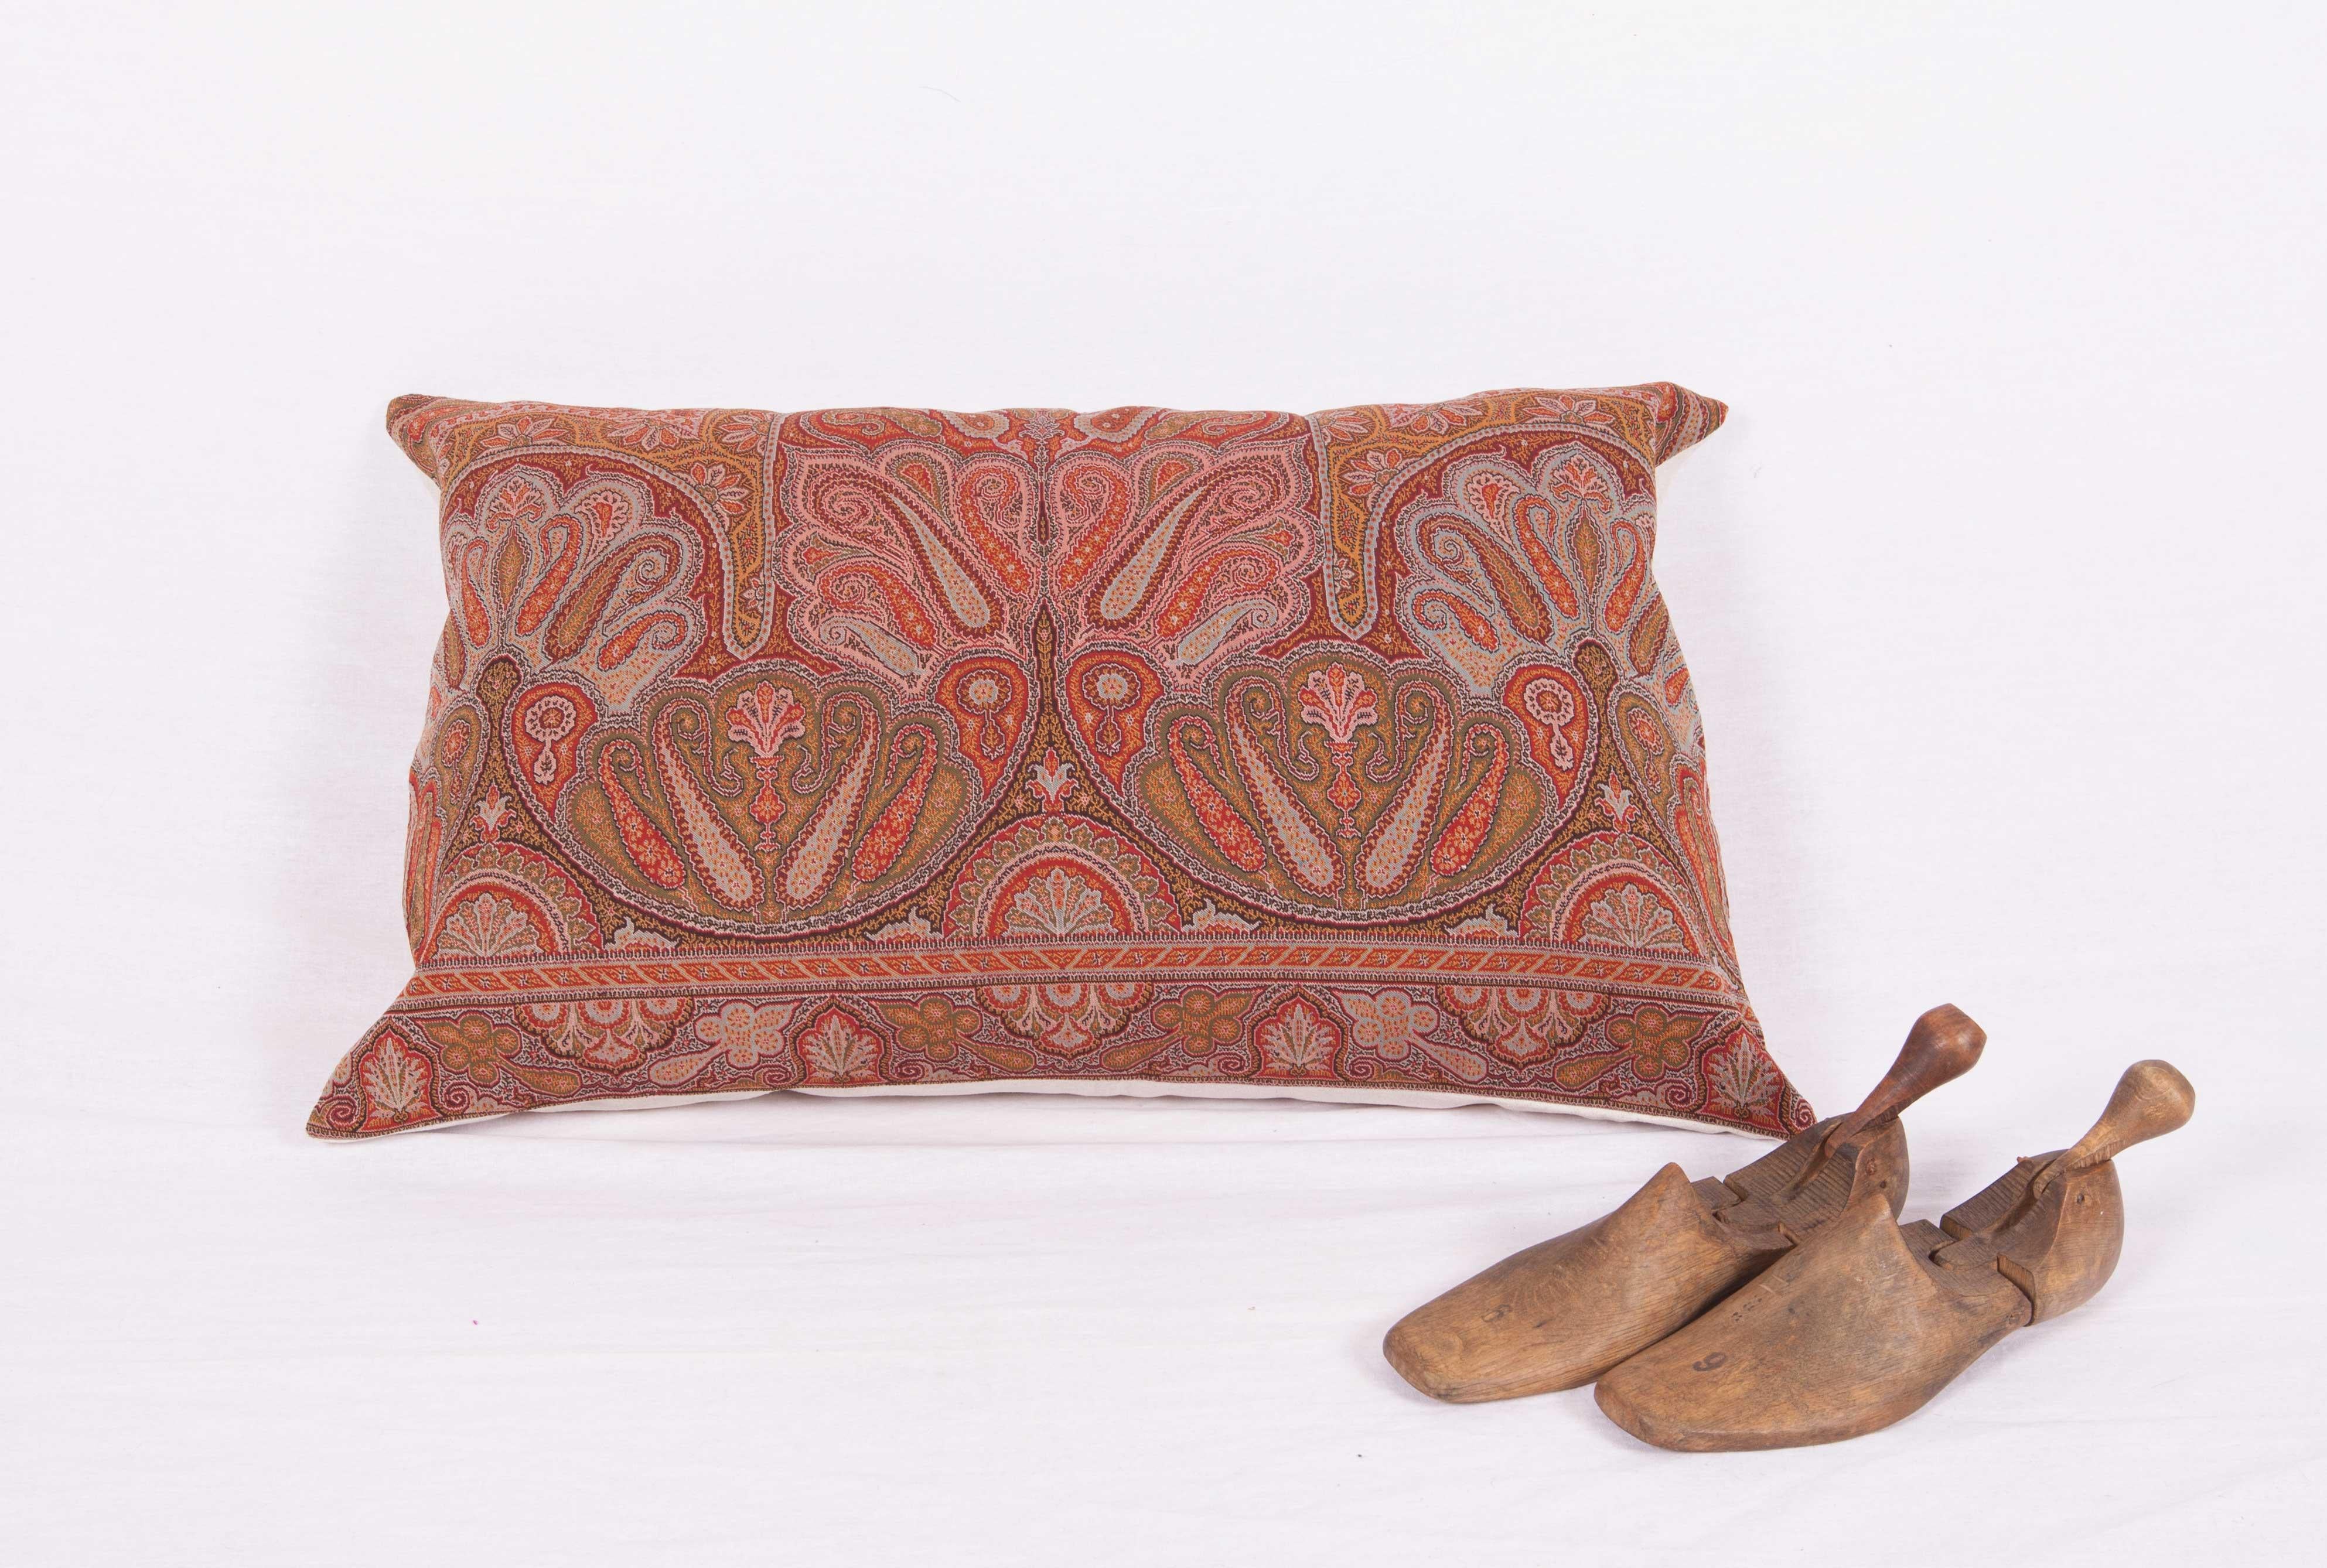 The pillow is made out of an early 19th century paisley shawl. It does not come with an insert but it comes with a bag made to the size and out of cotton to accommodate the filling. The backing is made of linen. Please Note: Filling is not provided.